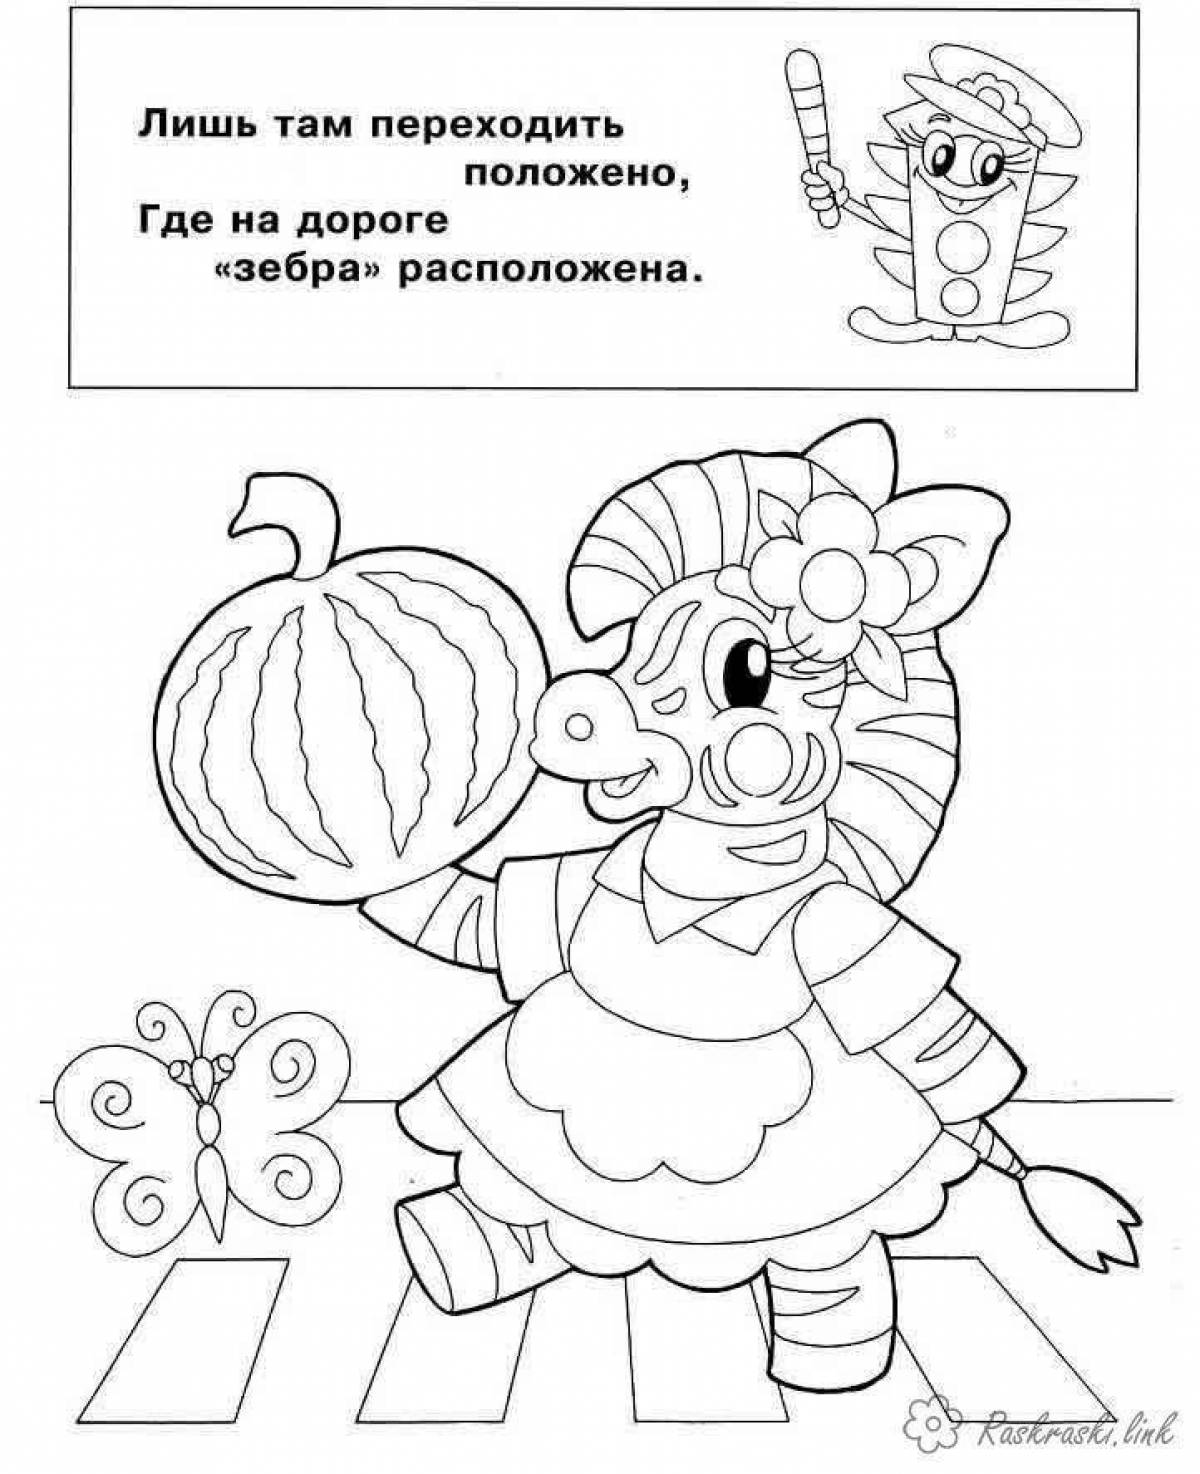 Primary school rules of the road coloring page